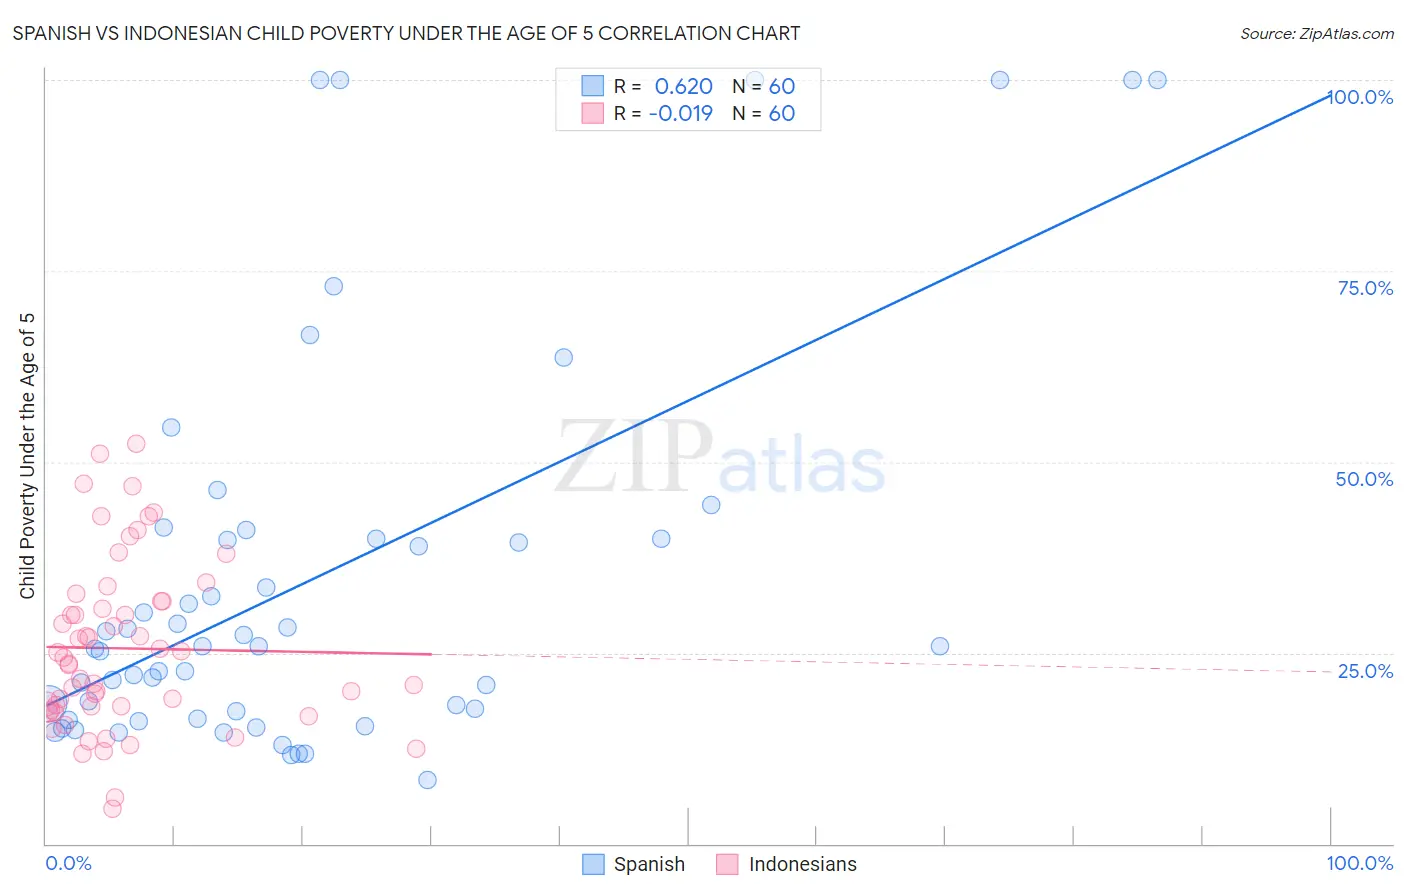 Spanish vs Indonesian Child Poverty Under the Age of 5